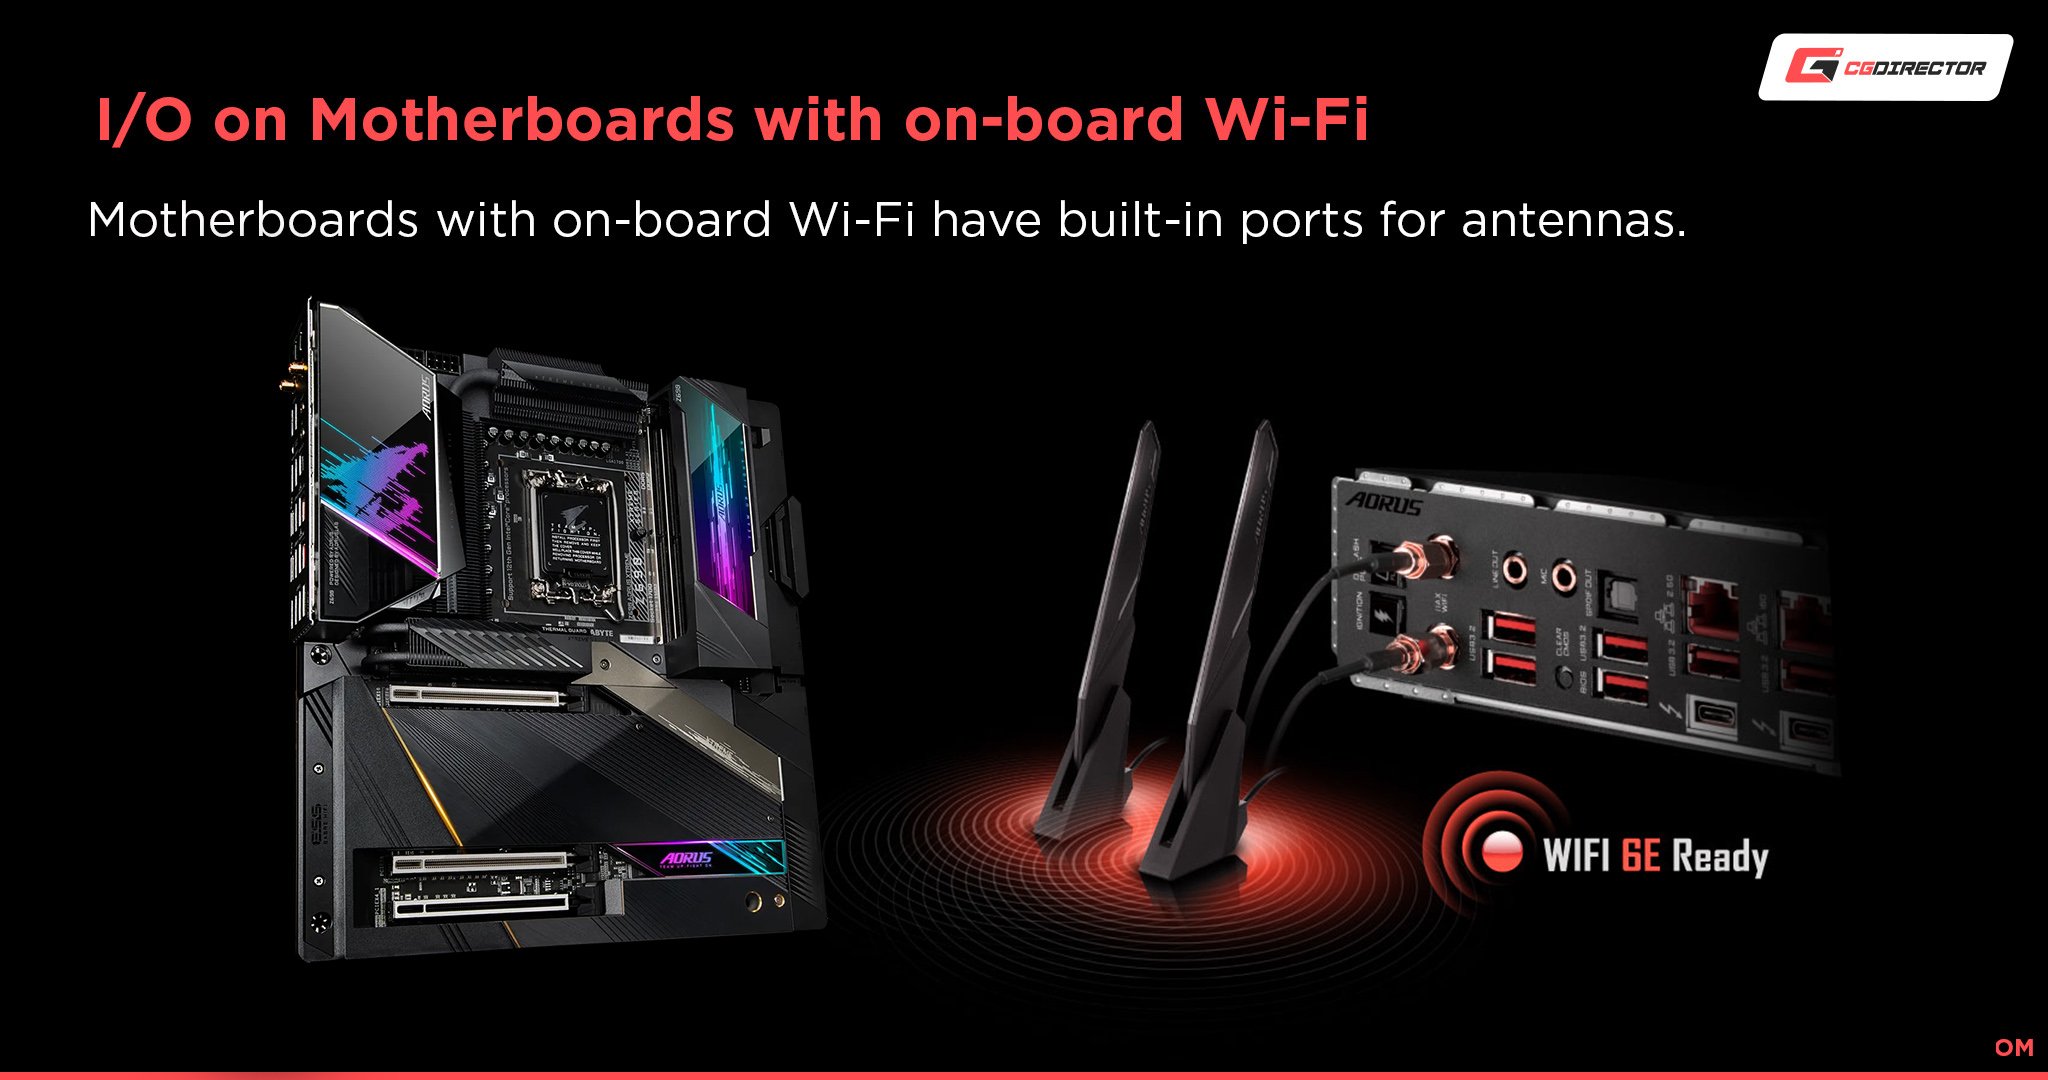 I O on Motherboards with on-board Wi-Fi